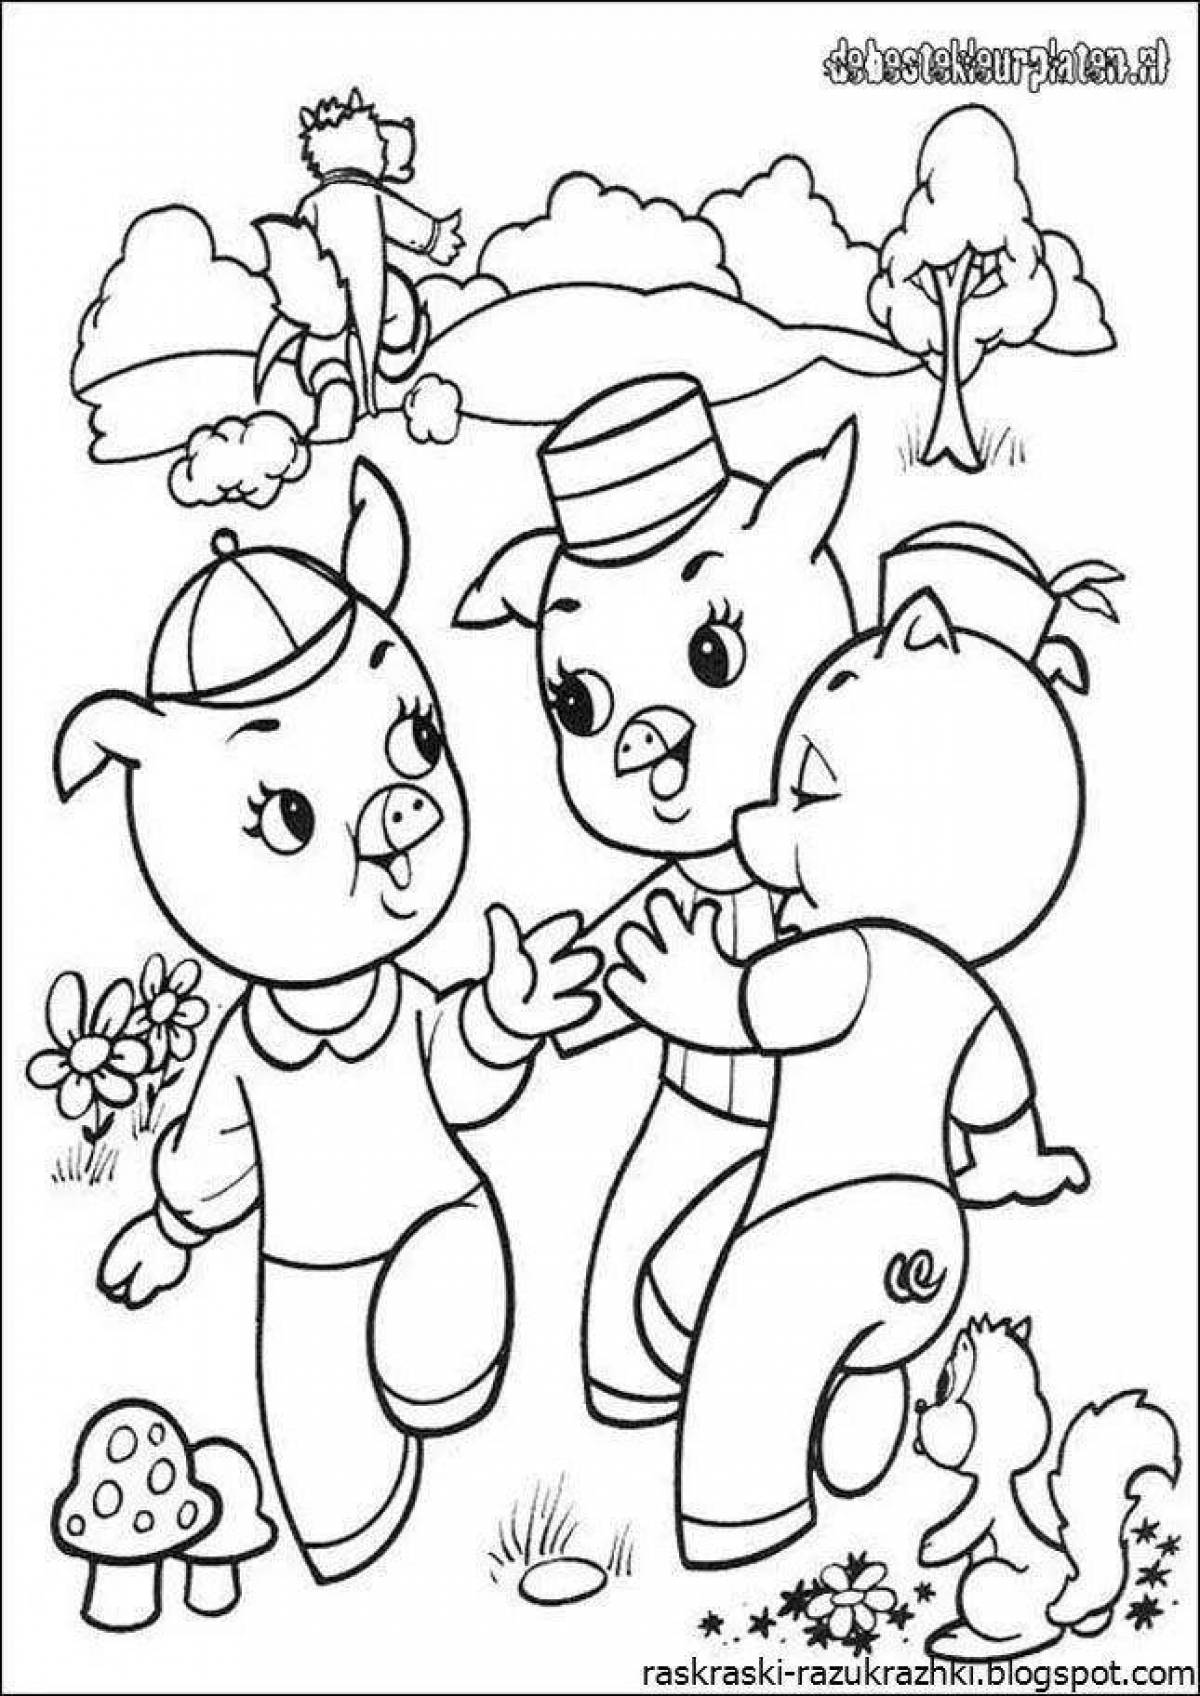 Three little pigs for kids #3